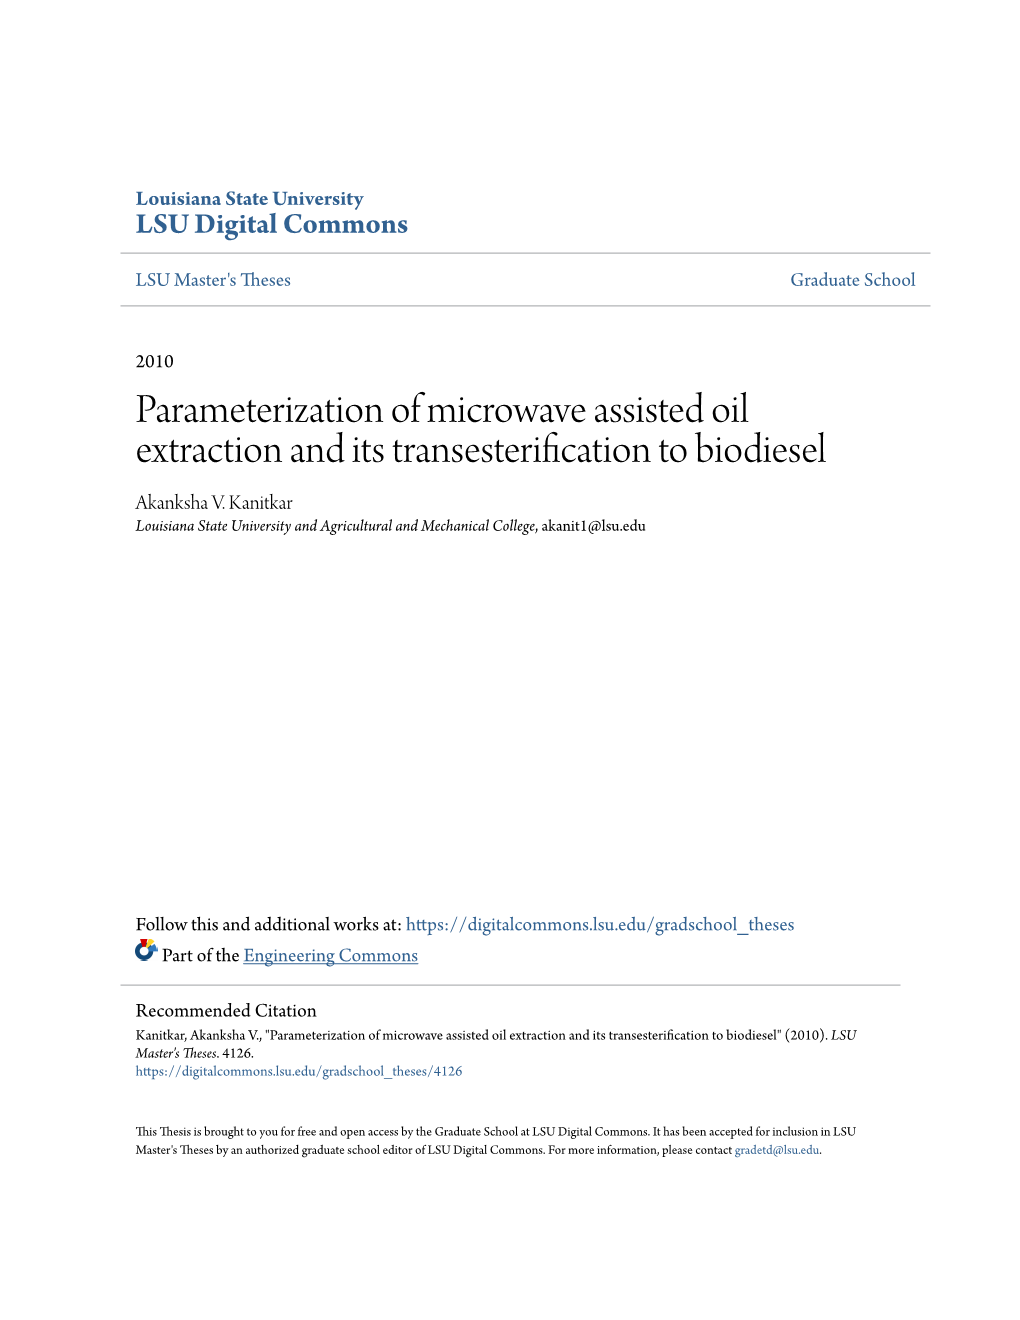 Parameterization of Microwave Assisted Oil Extraction and Its Transesterification to Biodiesel Akanksha V